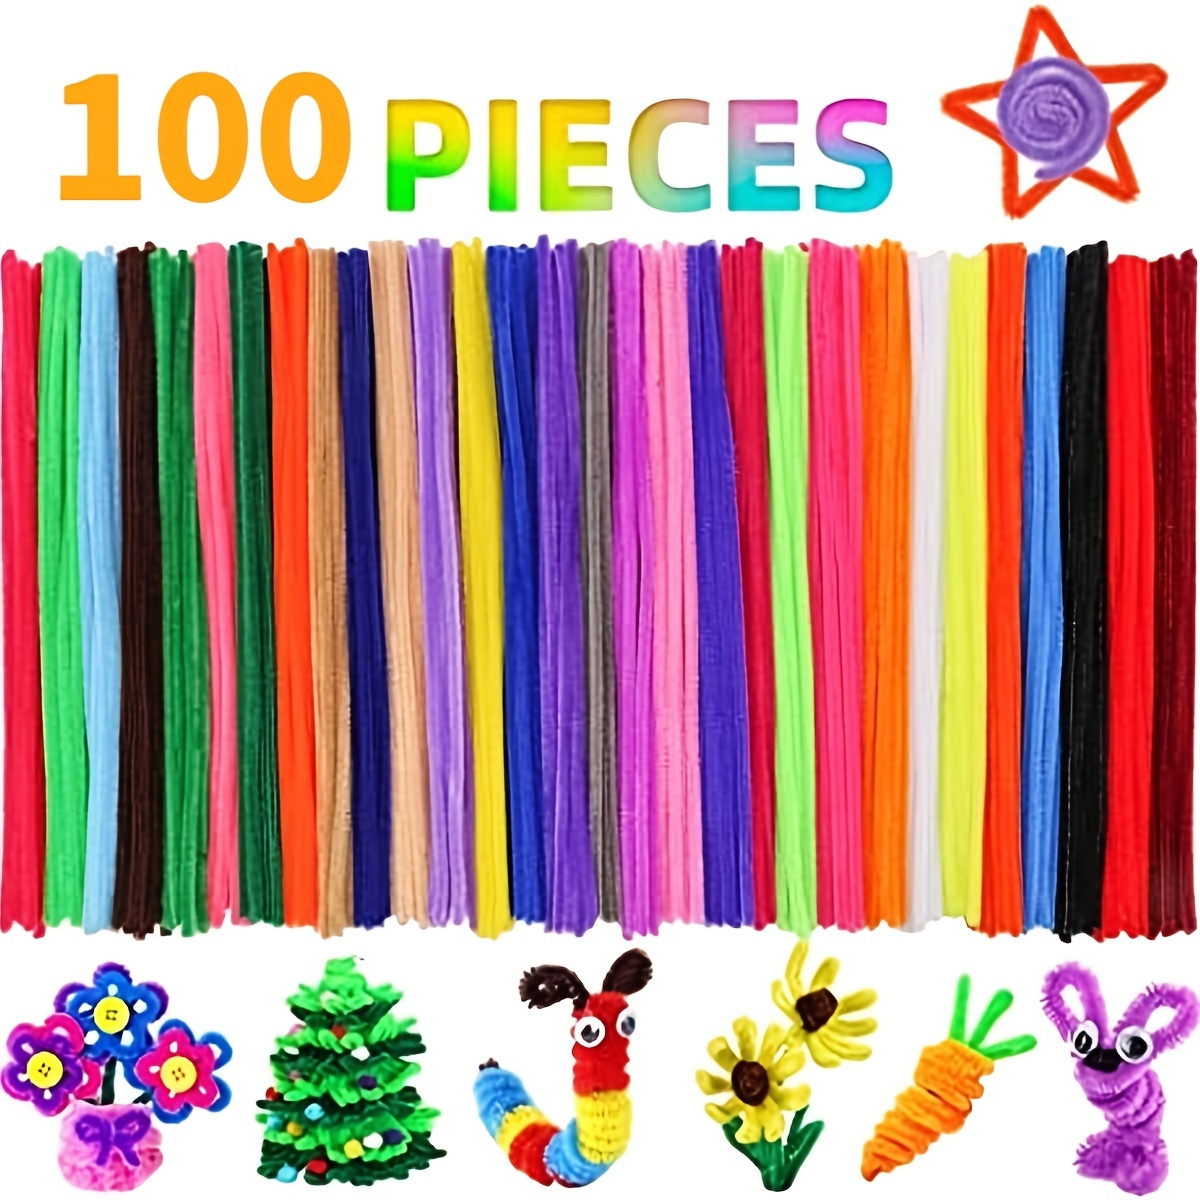 Colorations colorations Brown chenille Stem Pipe cleaners, Pack of 100,  Arts & crafts, Decorating, STEM, Single color, Activities for Kids